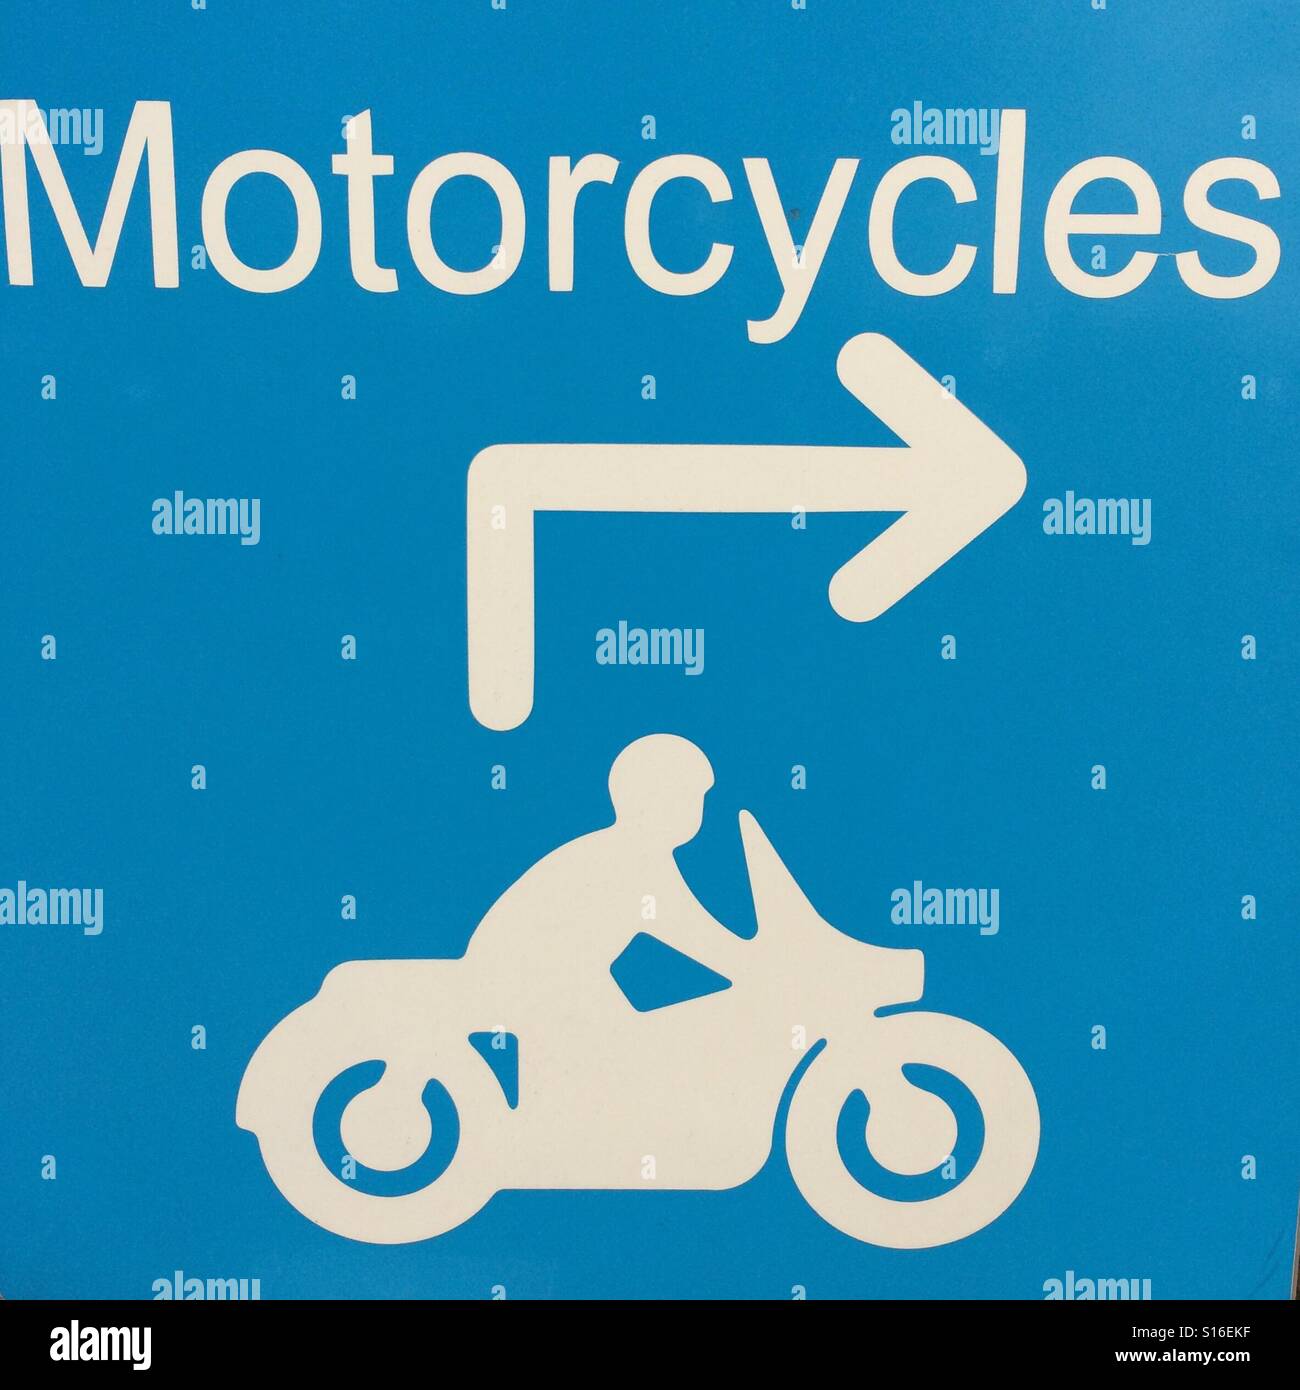 Motorcycle sign Stock Photo